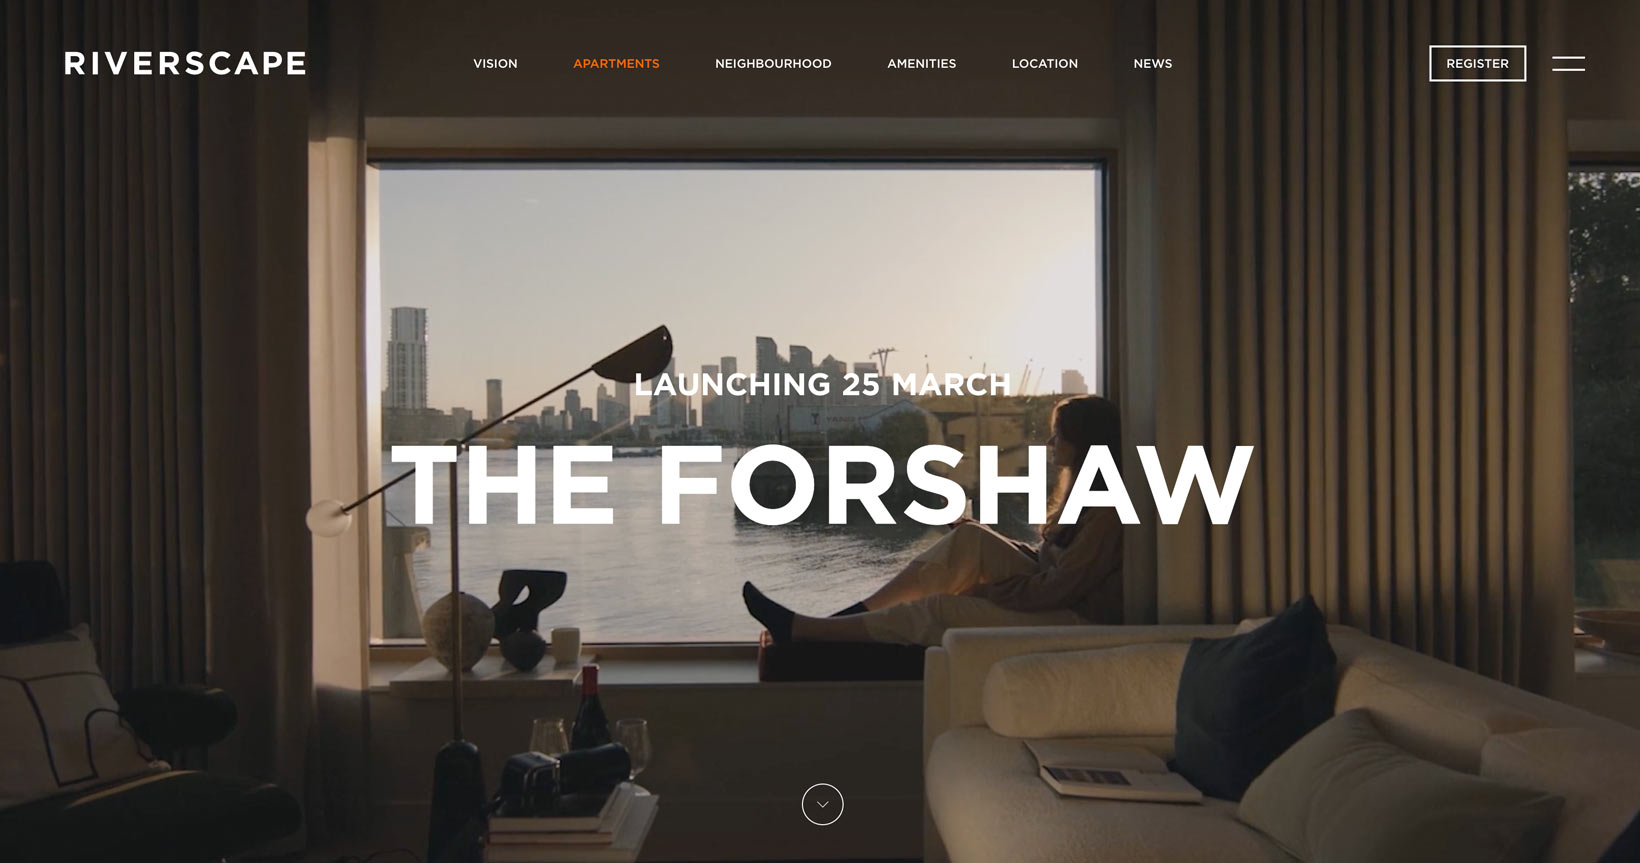 Launching soon: The Forshaw at Riverscape